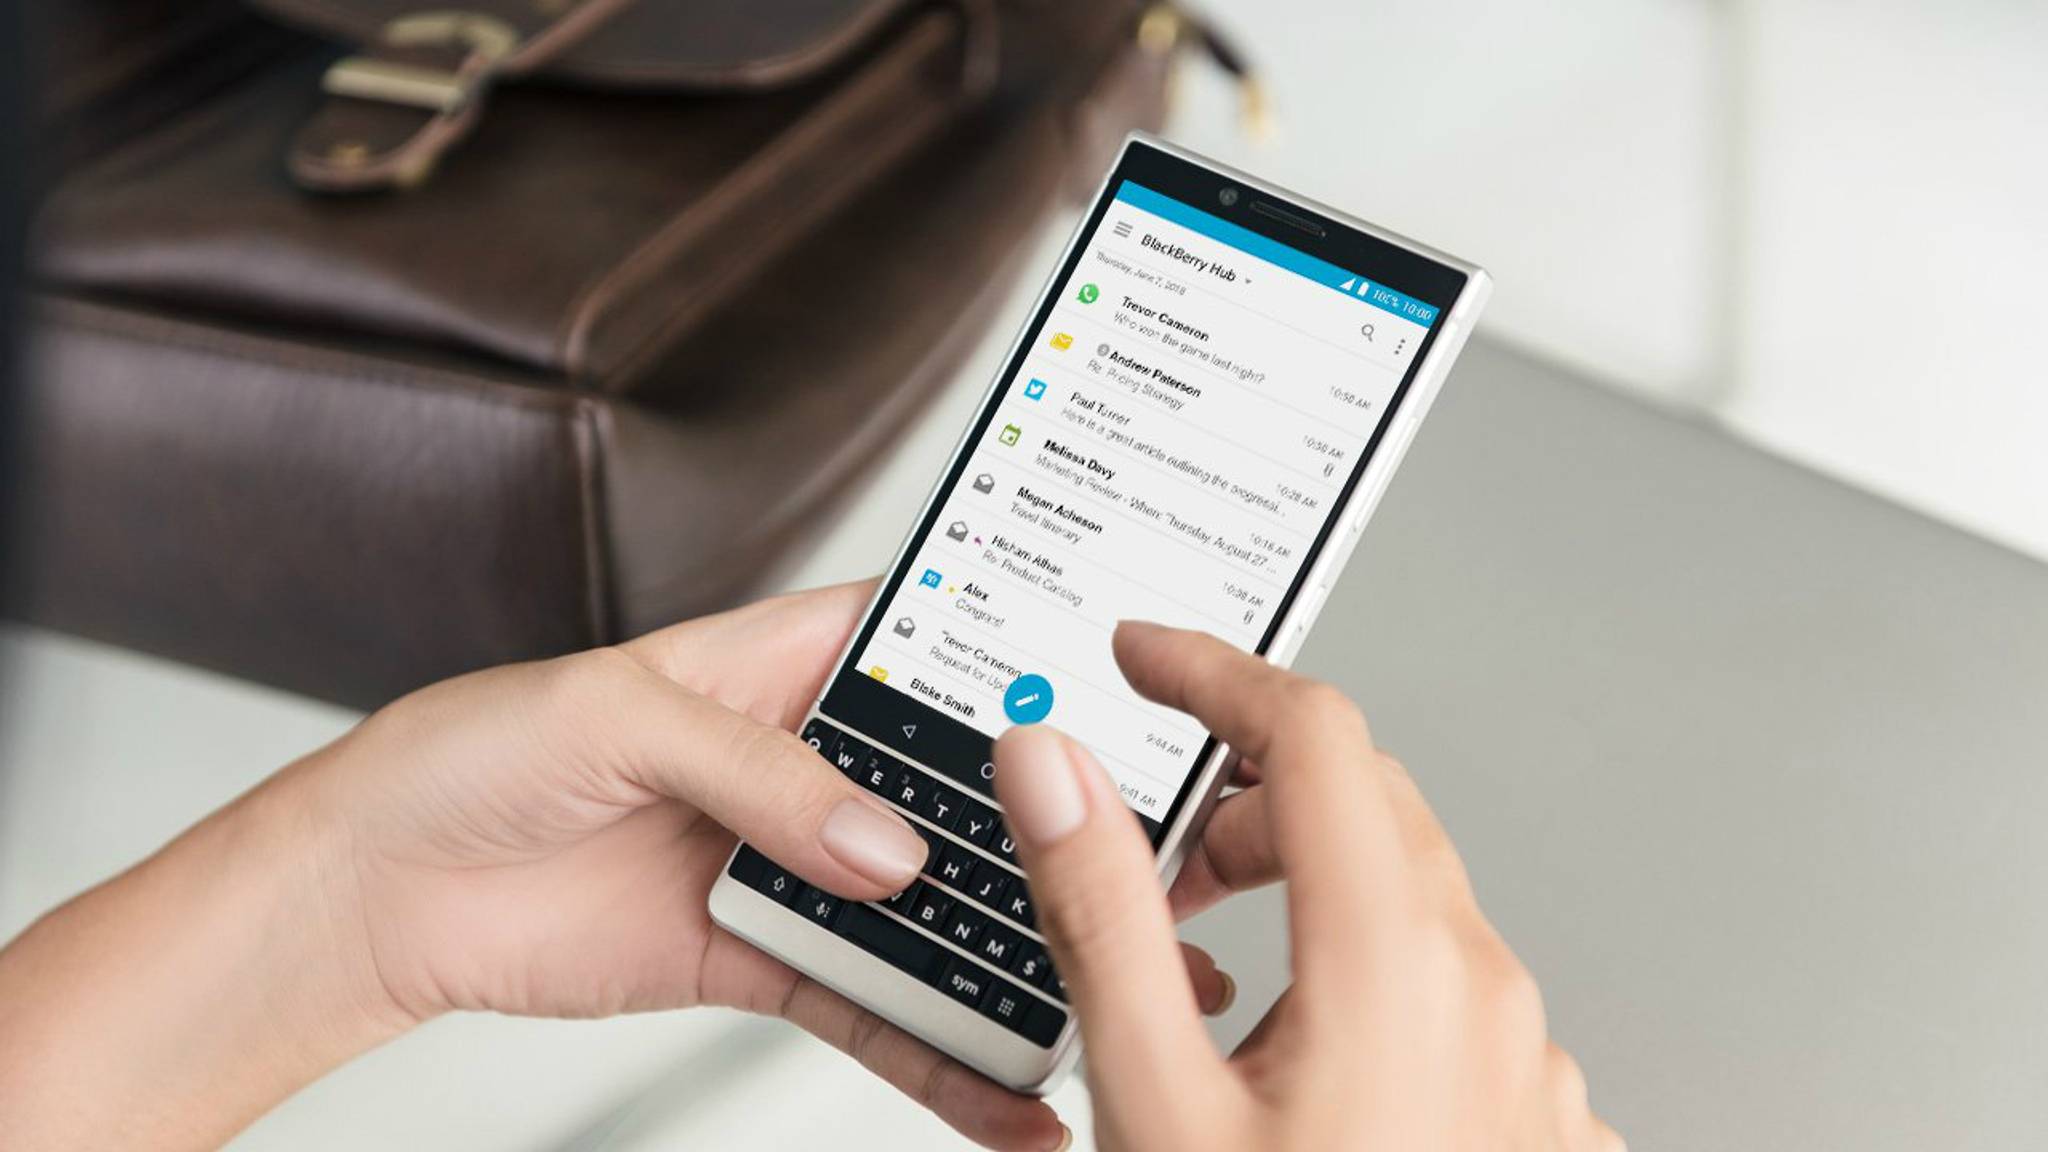 Blackberry returns with cybersecurity as its USP